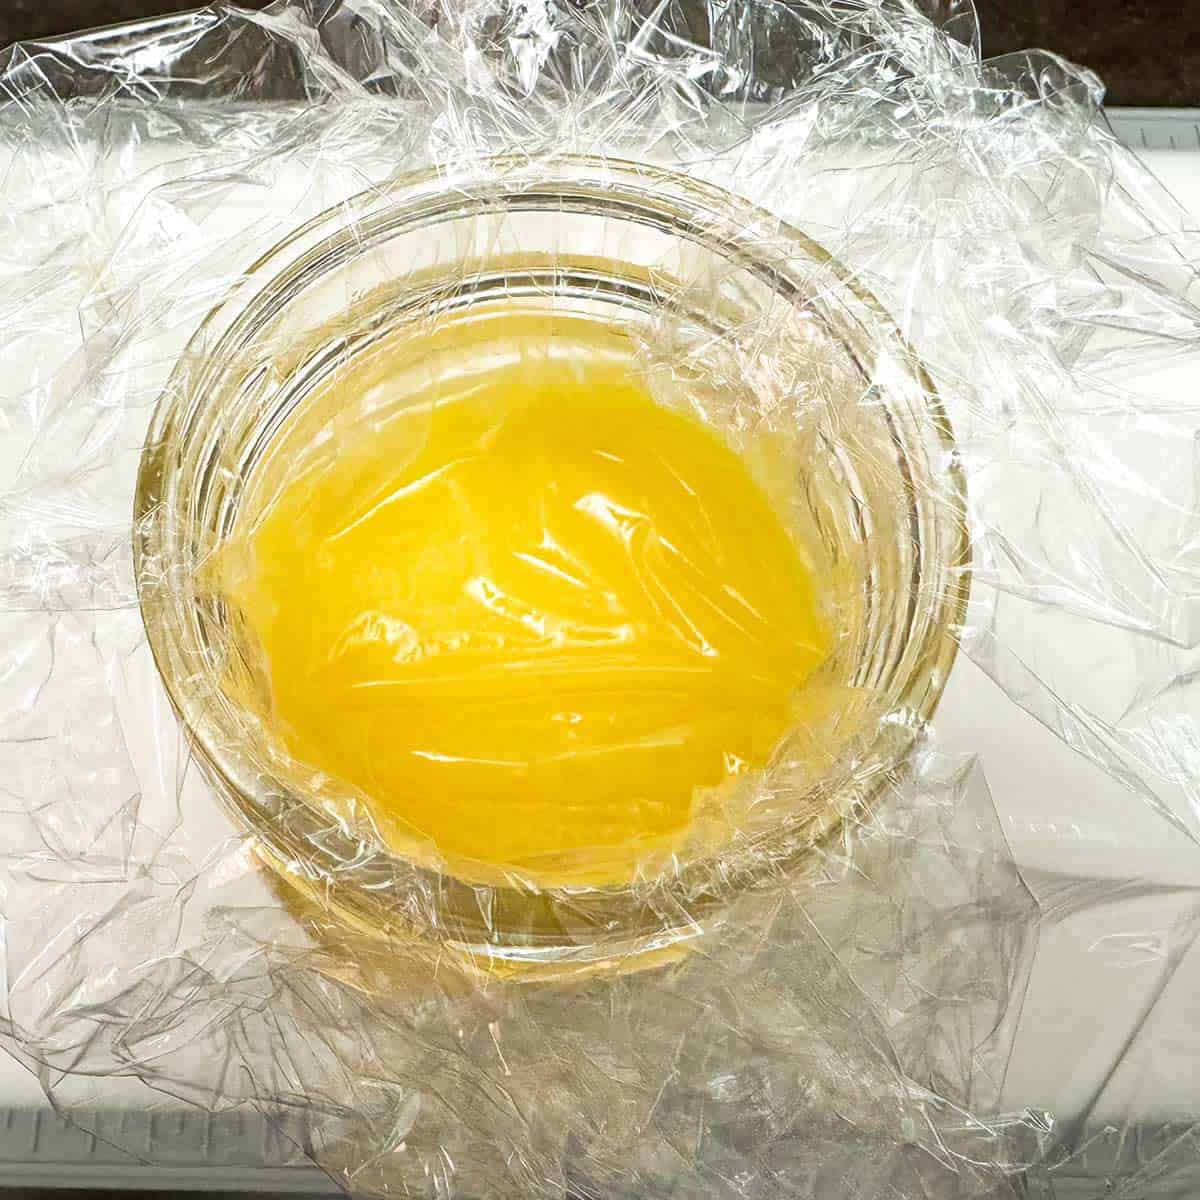 Laying plastic wrap on the lemon curd to eliminate a crust.